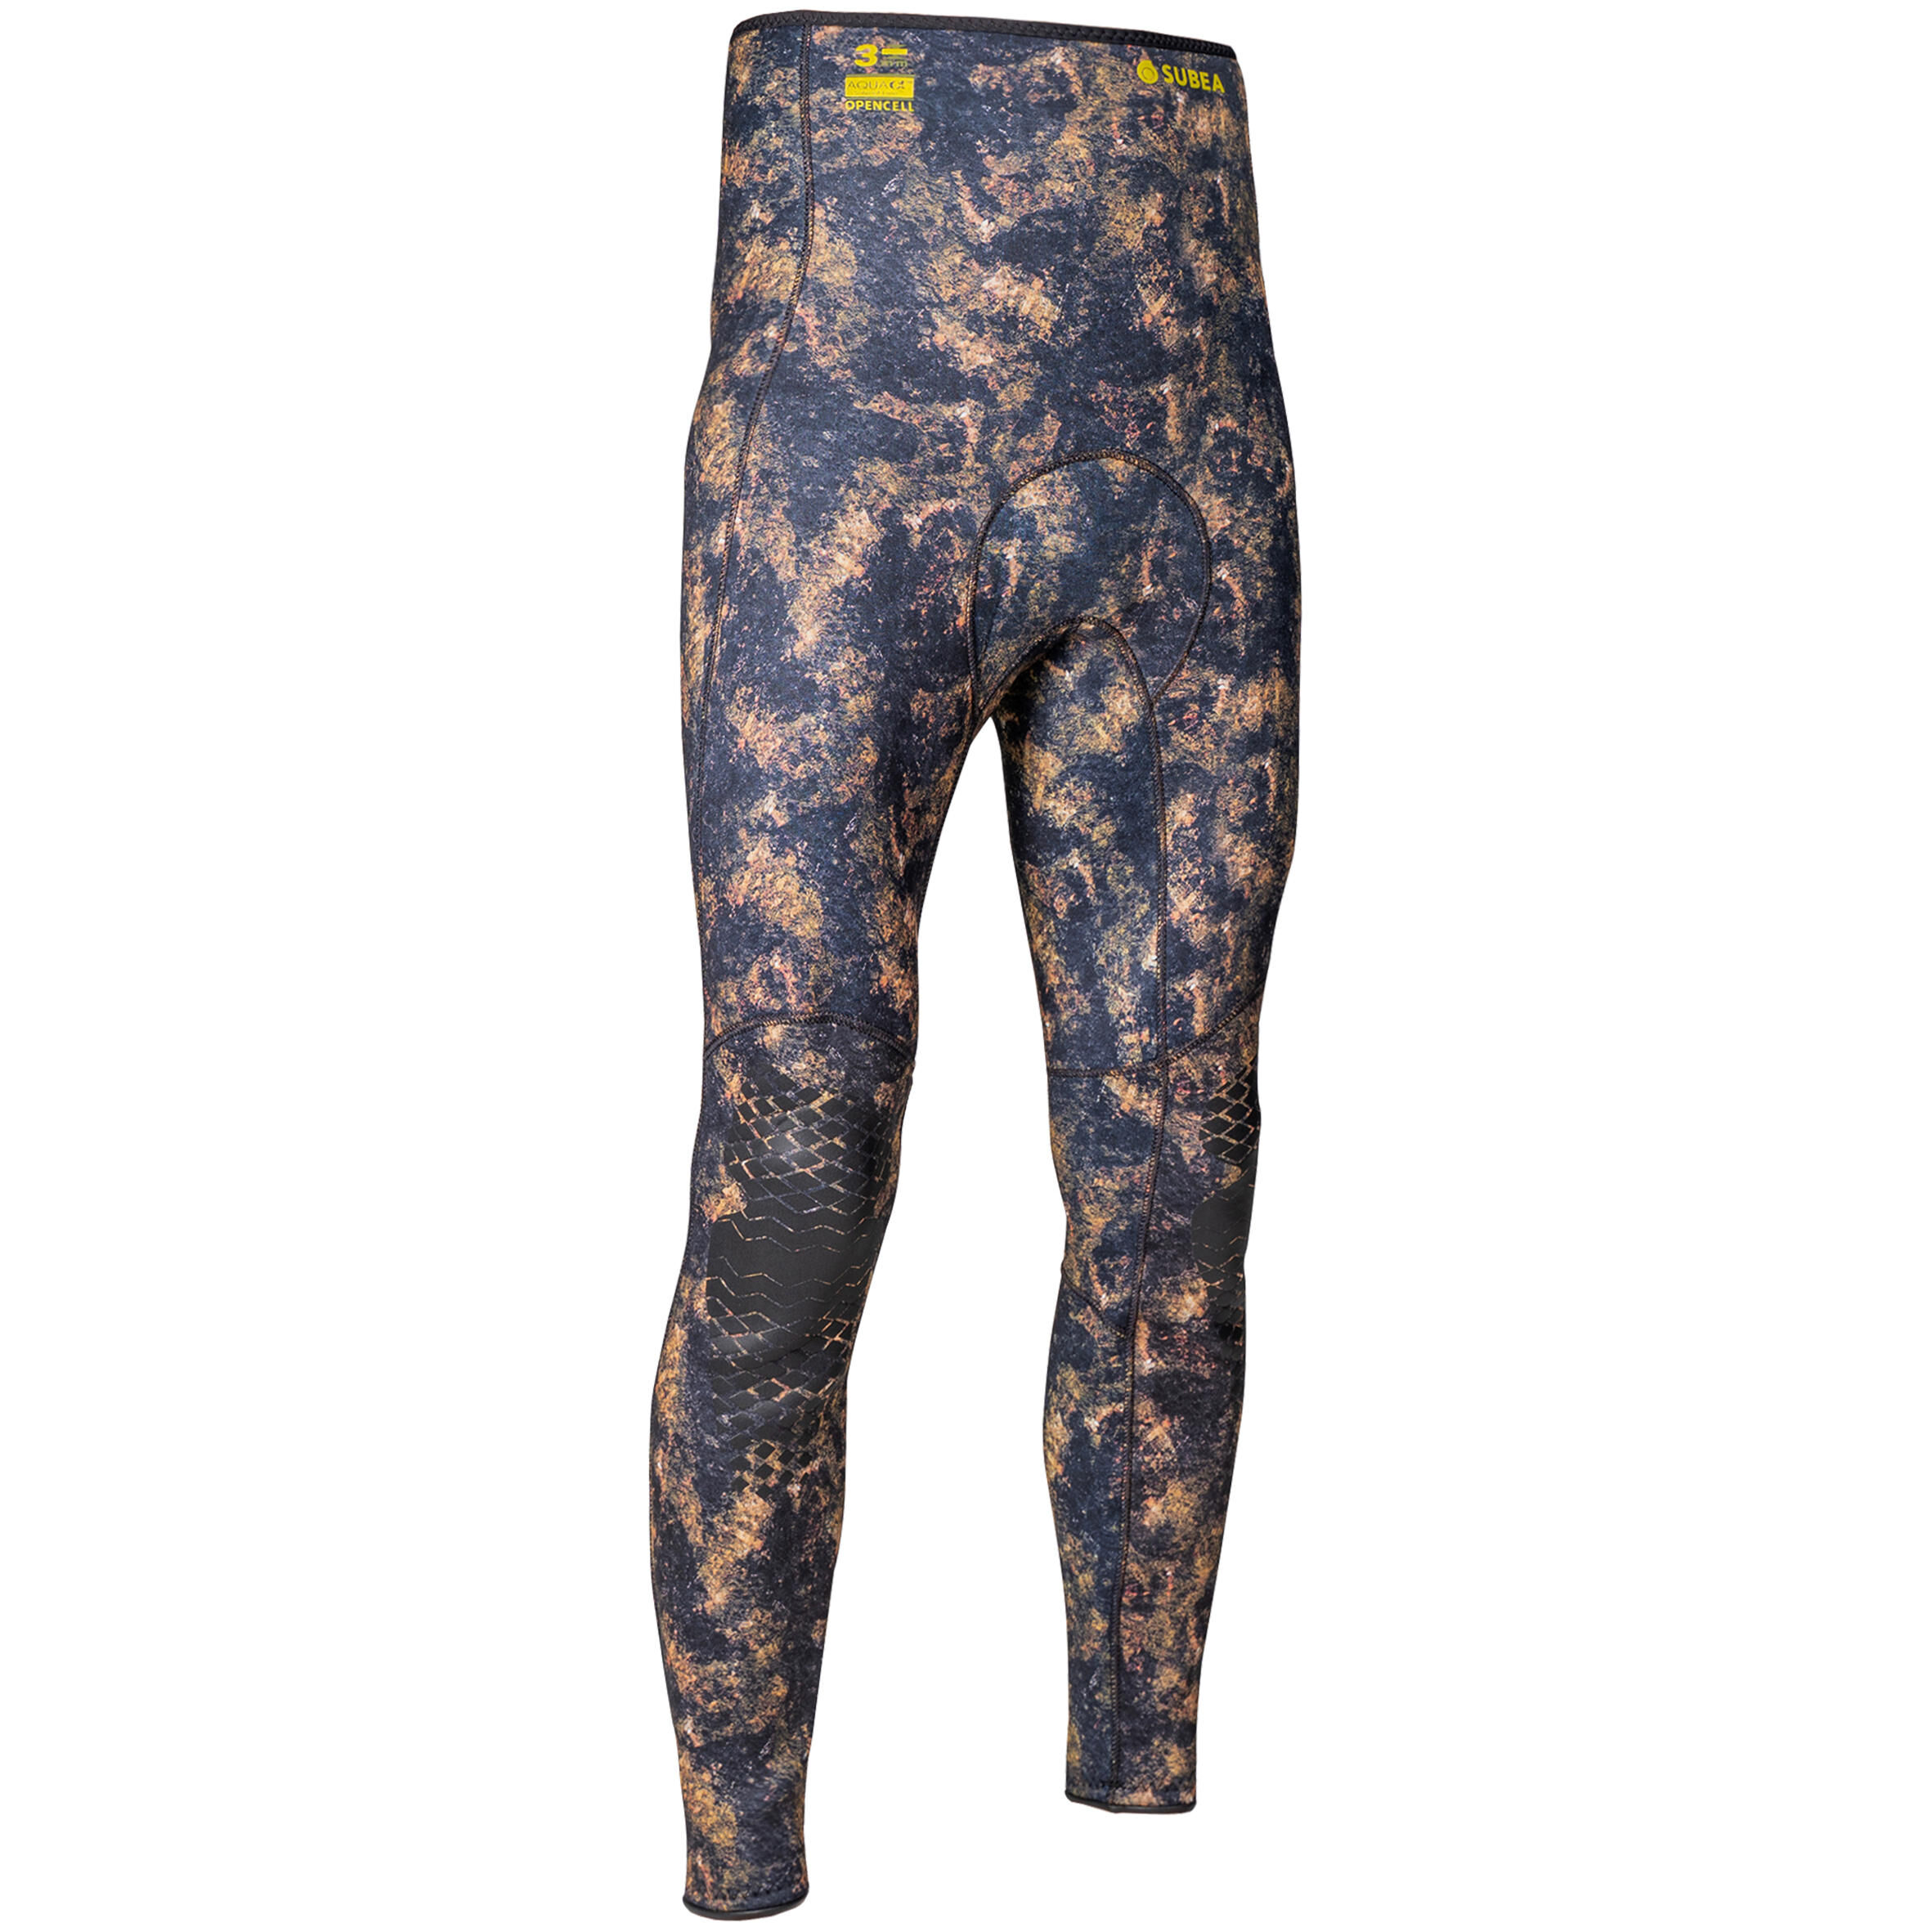 SUBEA 3mm split neoprene camouflage trousers for free-diving spearfishing